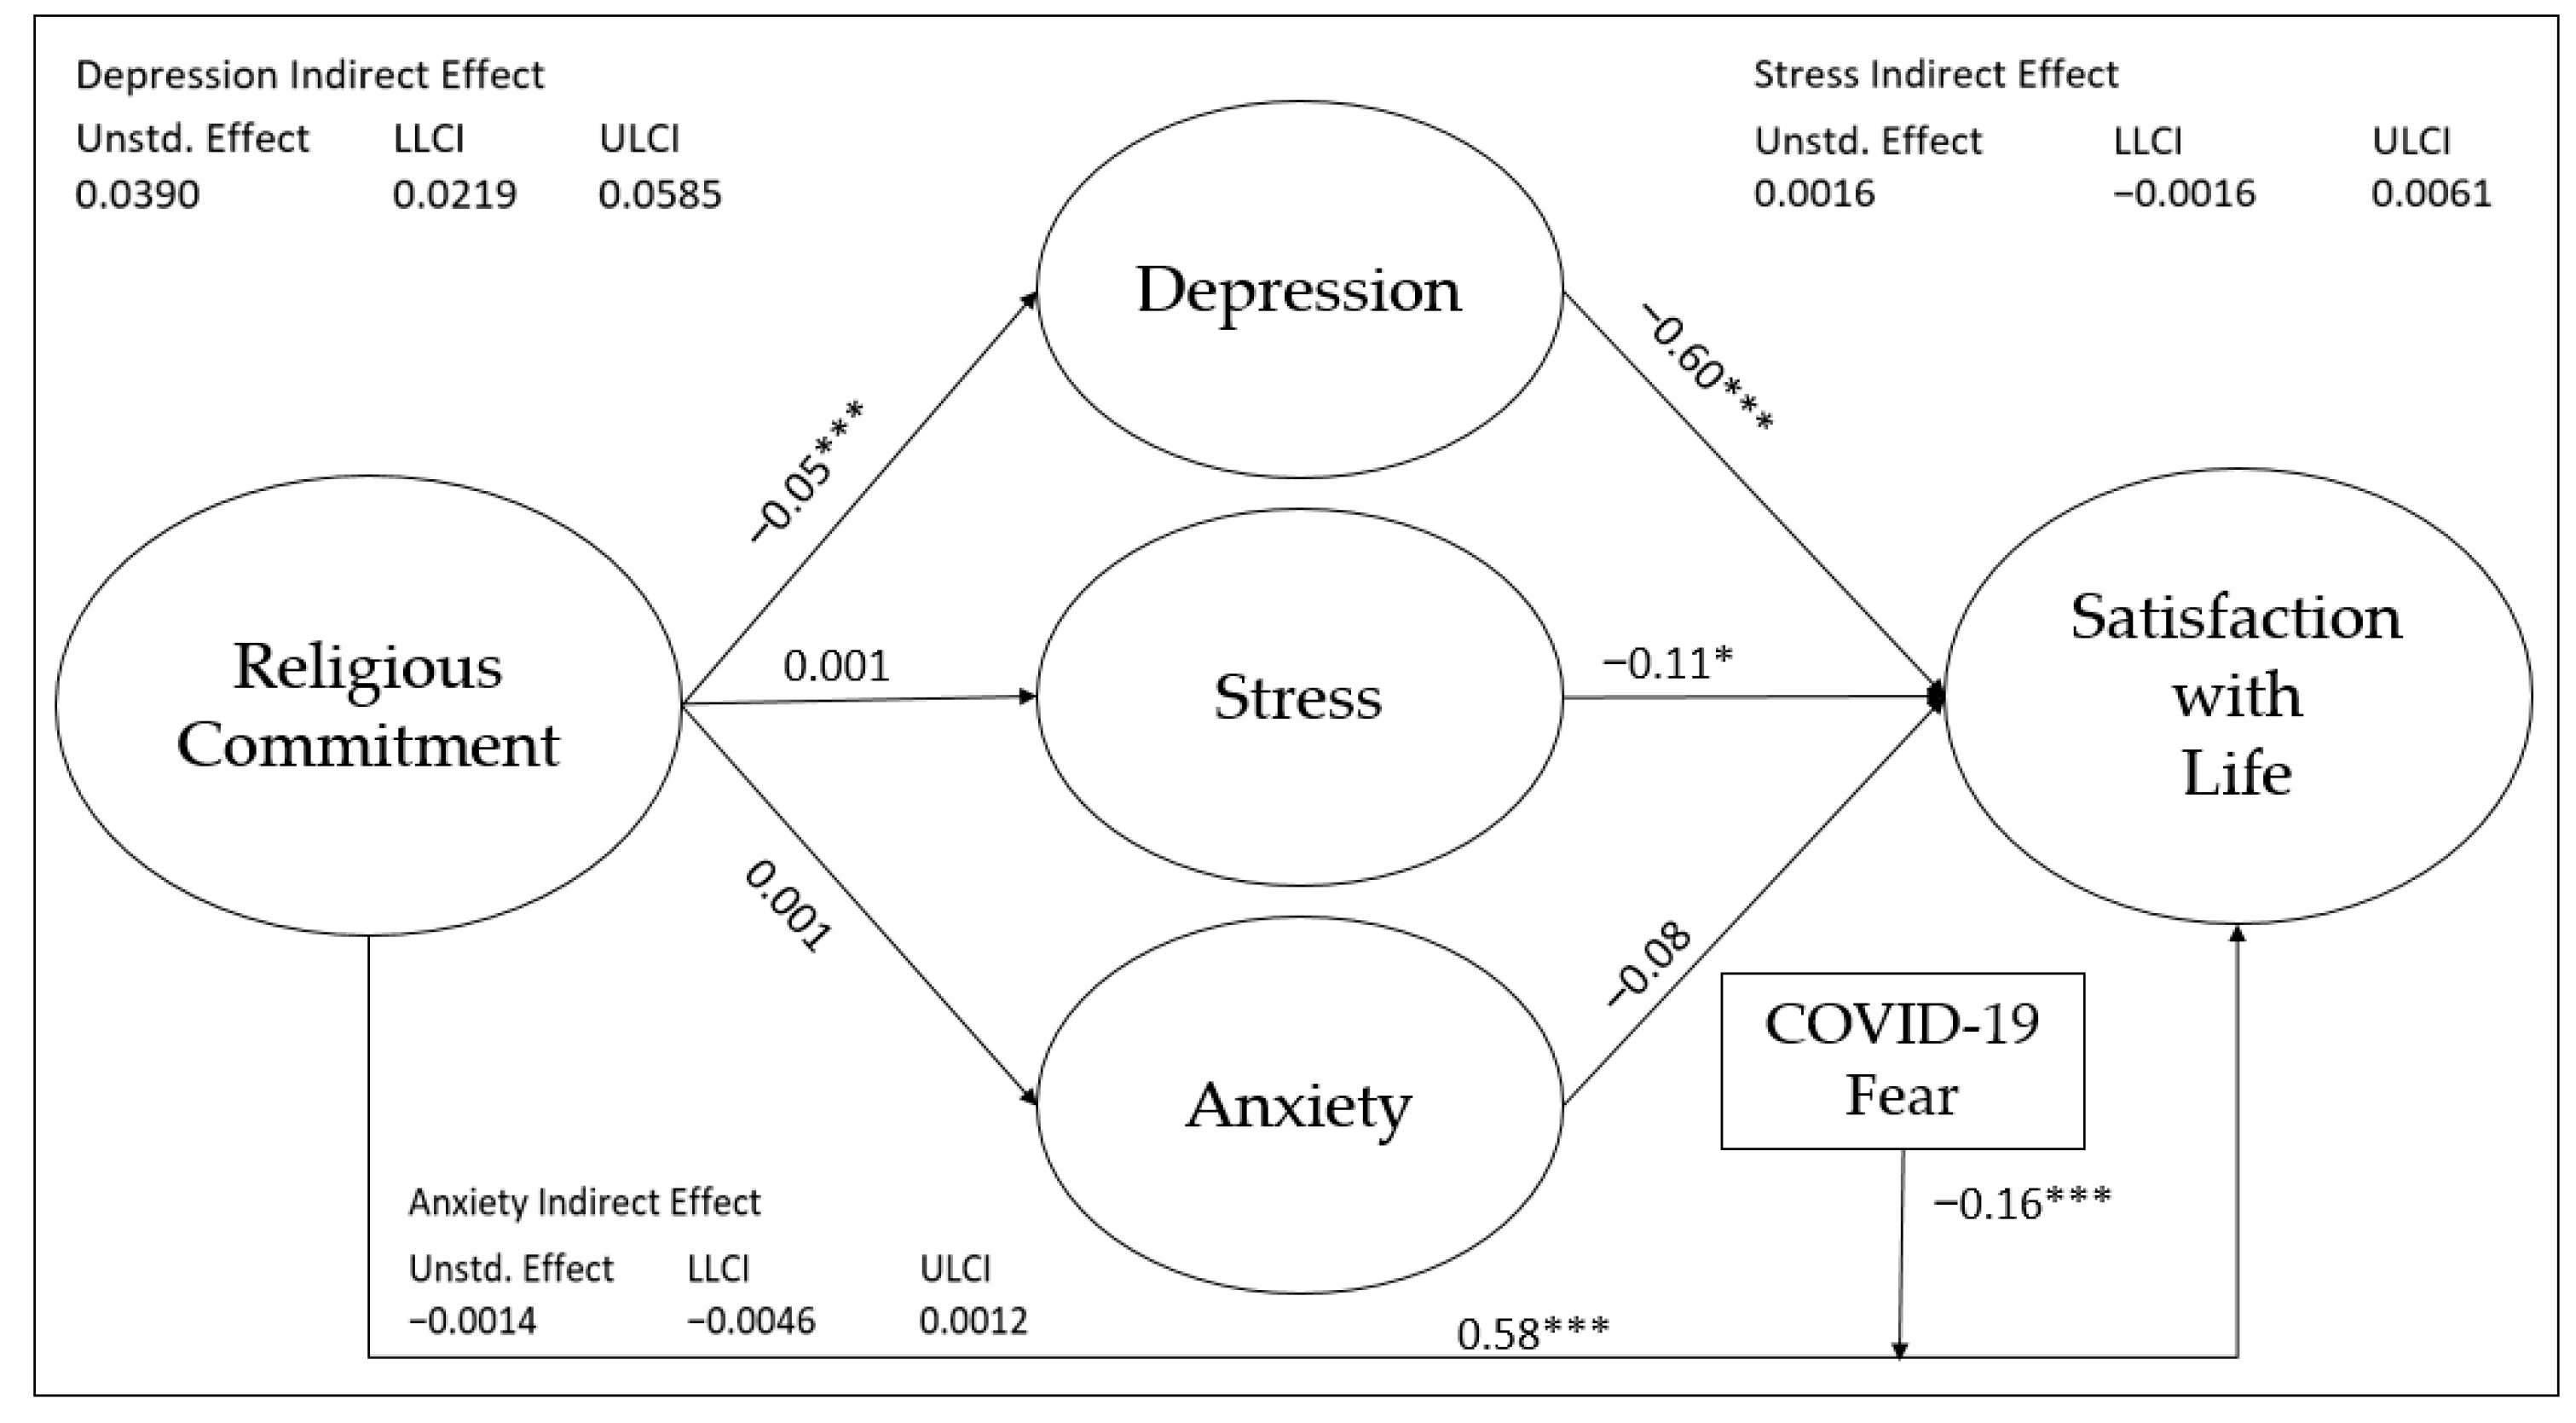 religions free full text how does religious commitment affect satisfaction with life during the covid 19 pandemic examining depression anxiety and stress as mediators html